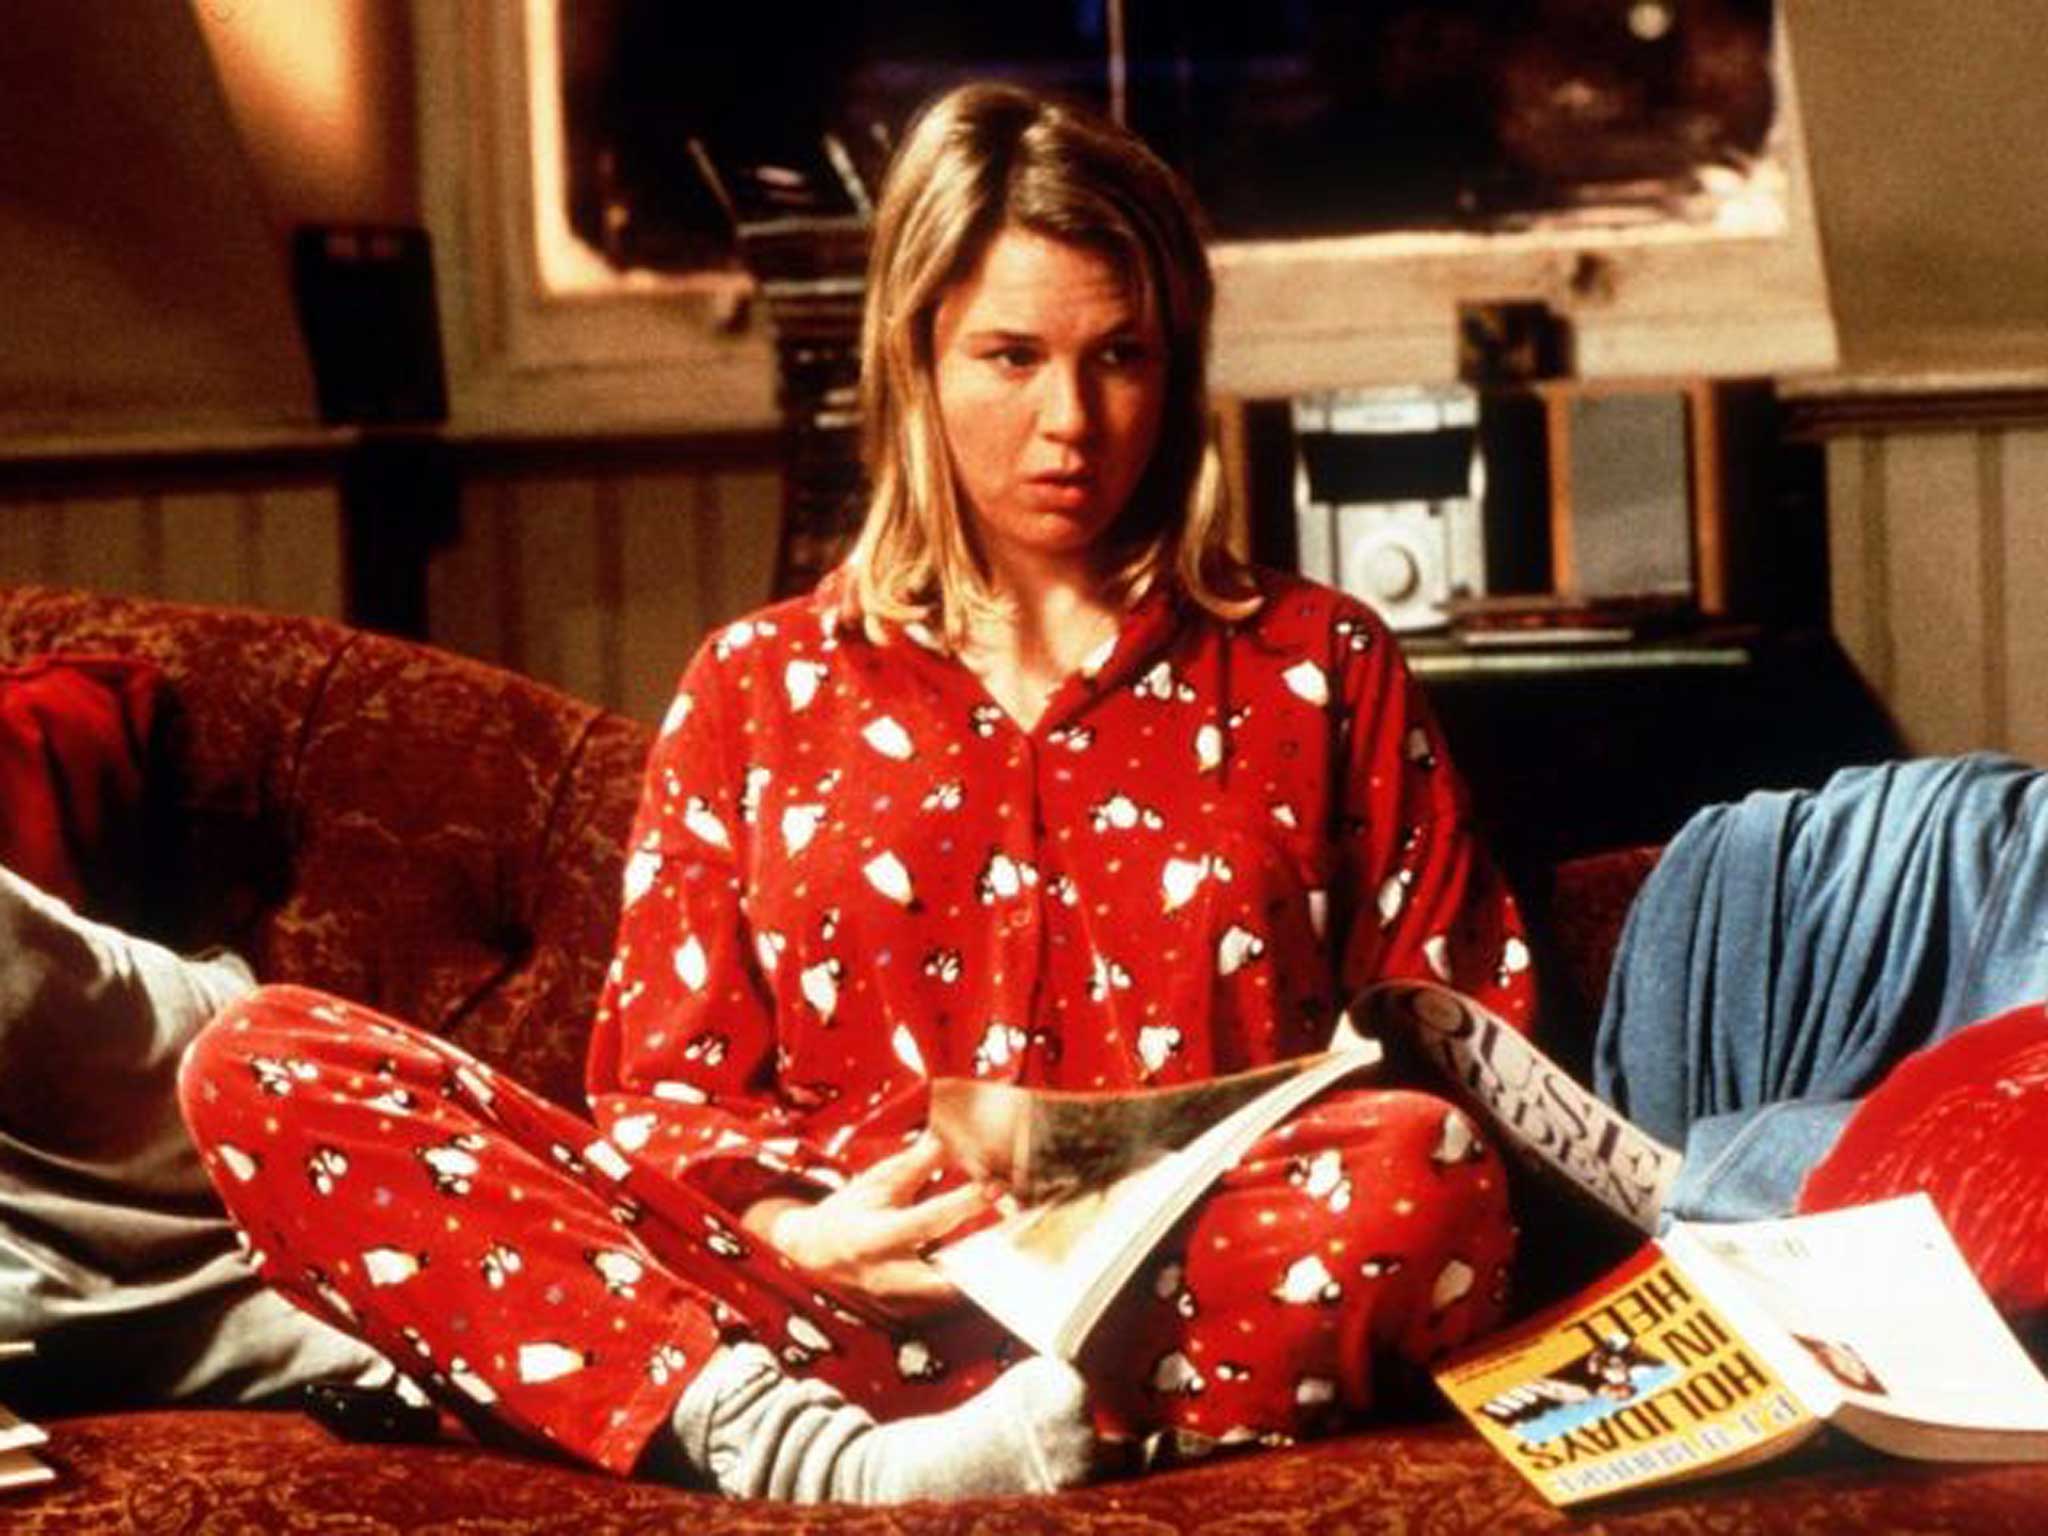 The Bridget Jones generation? The number of people living alone is double what it was in 1974